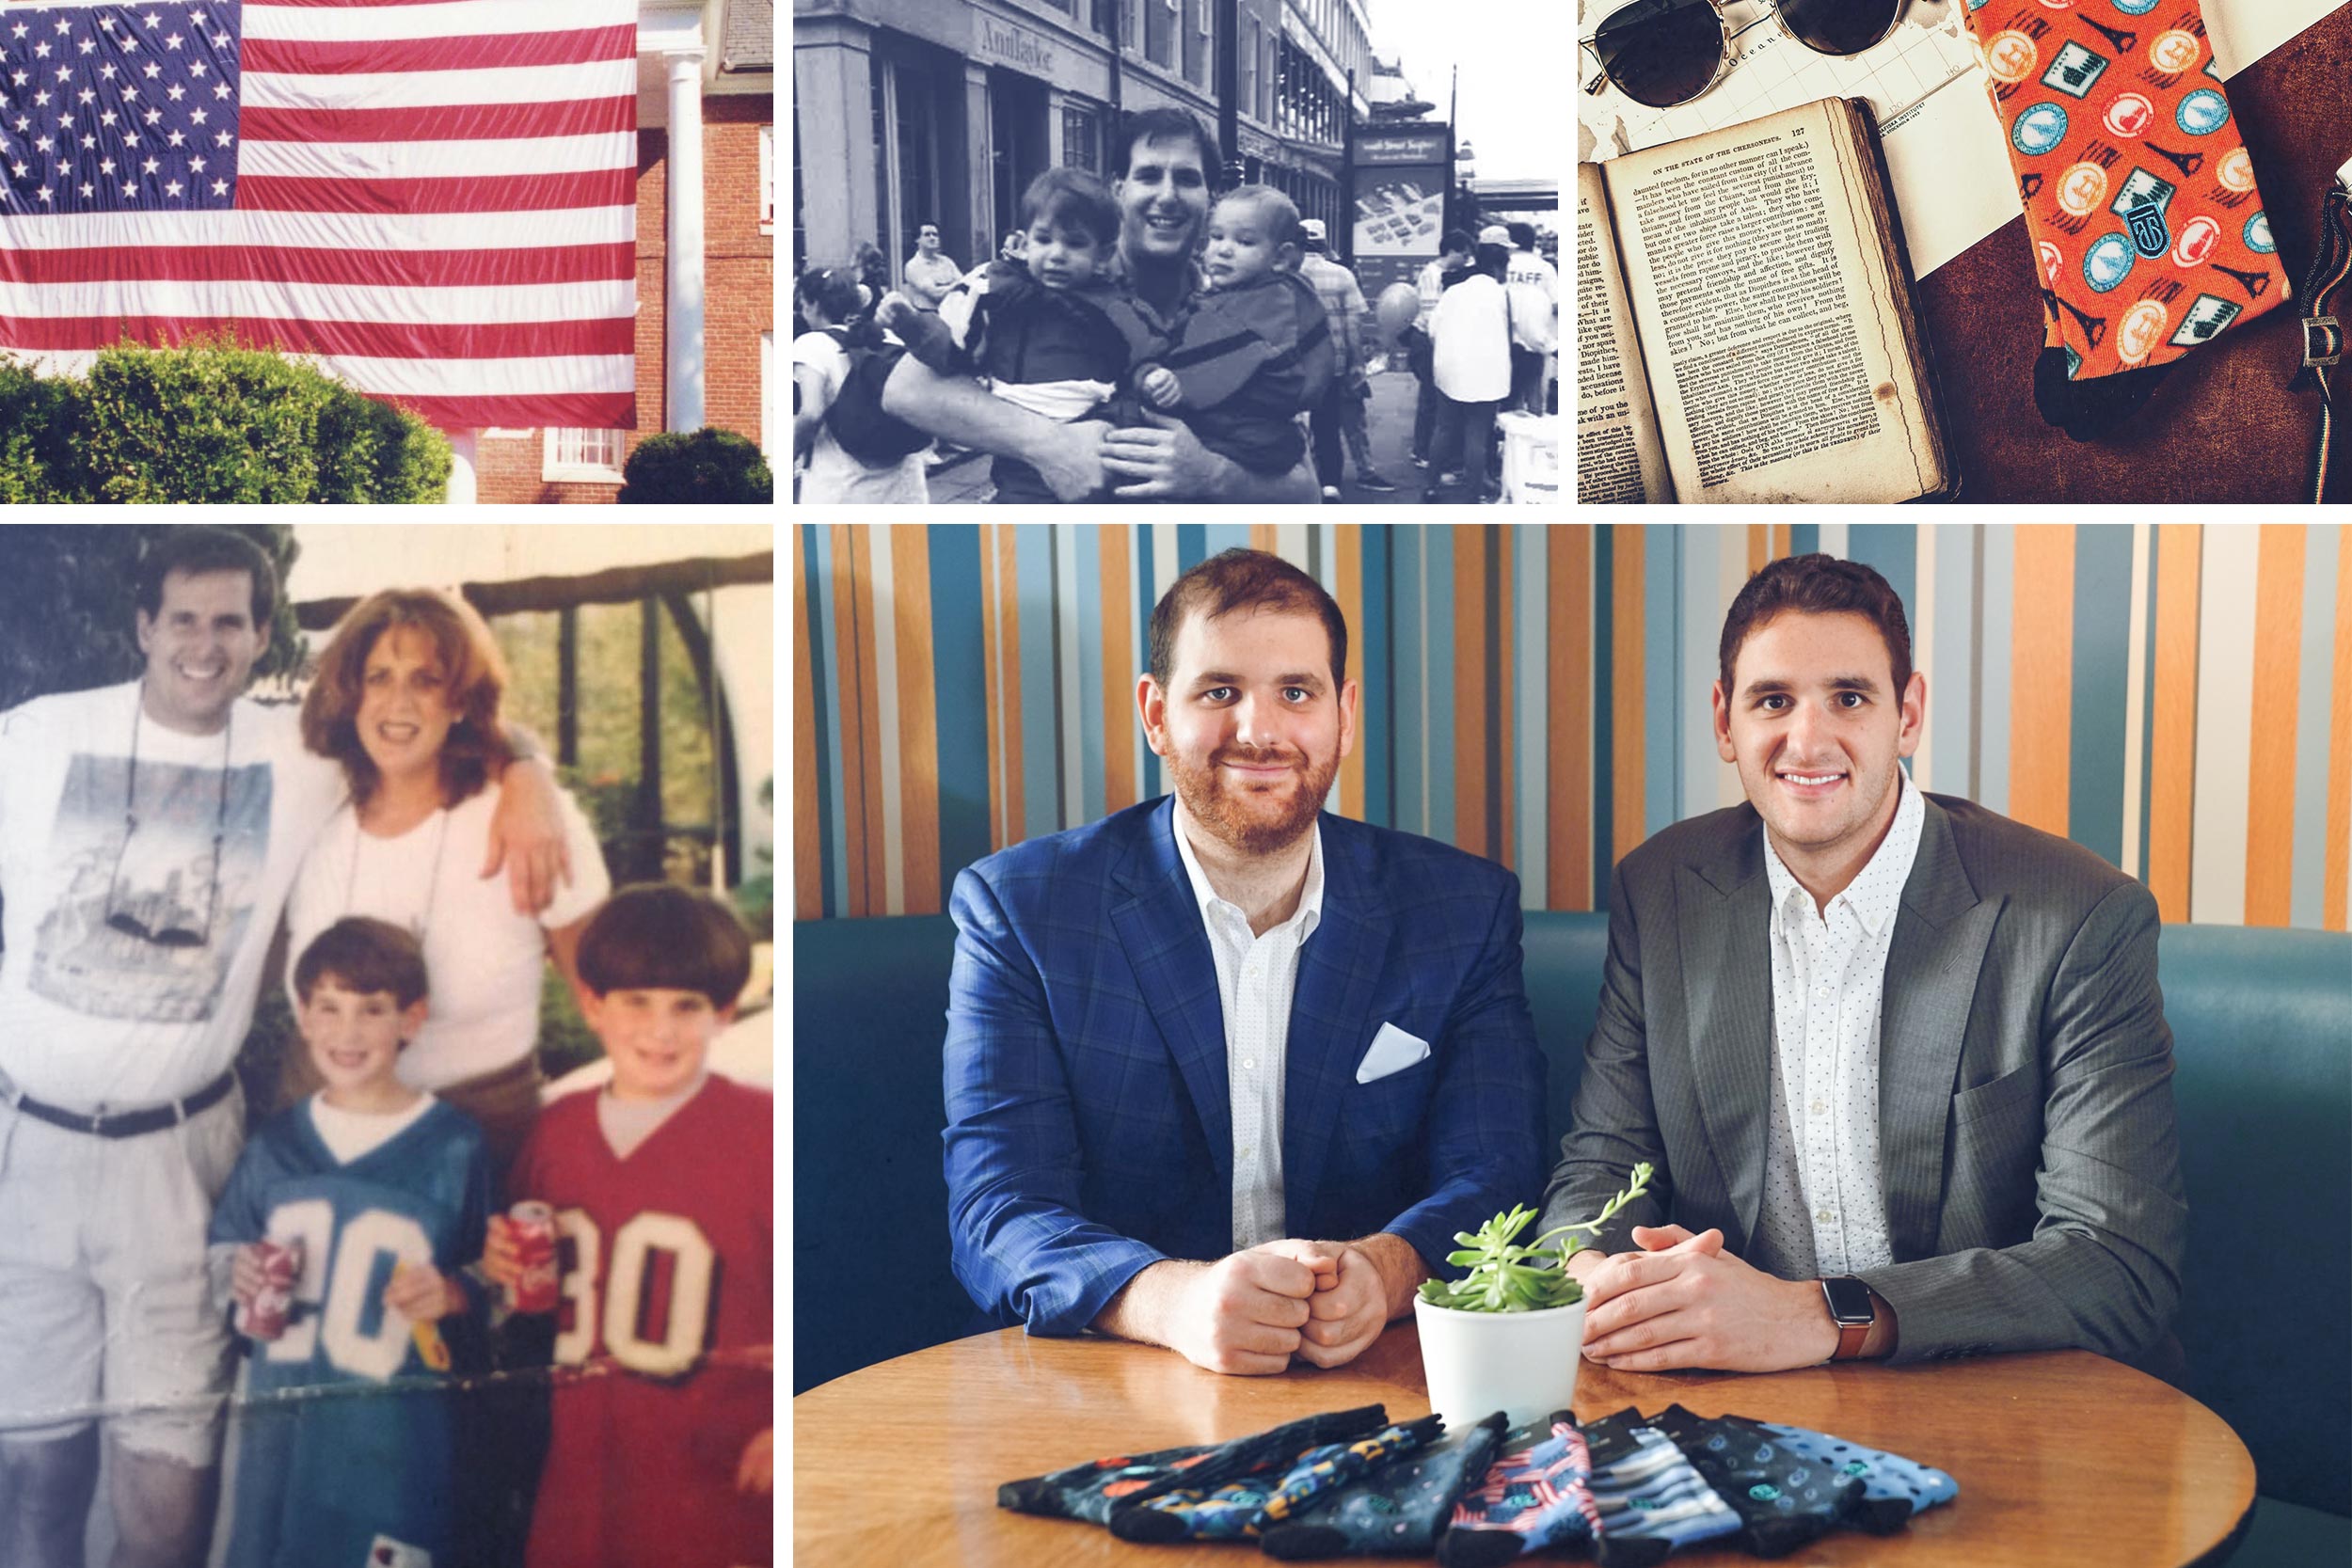 Collage of images of Dan Friedman and his family